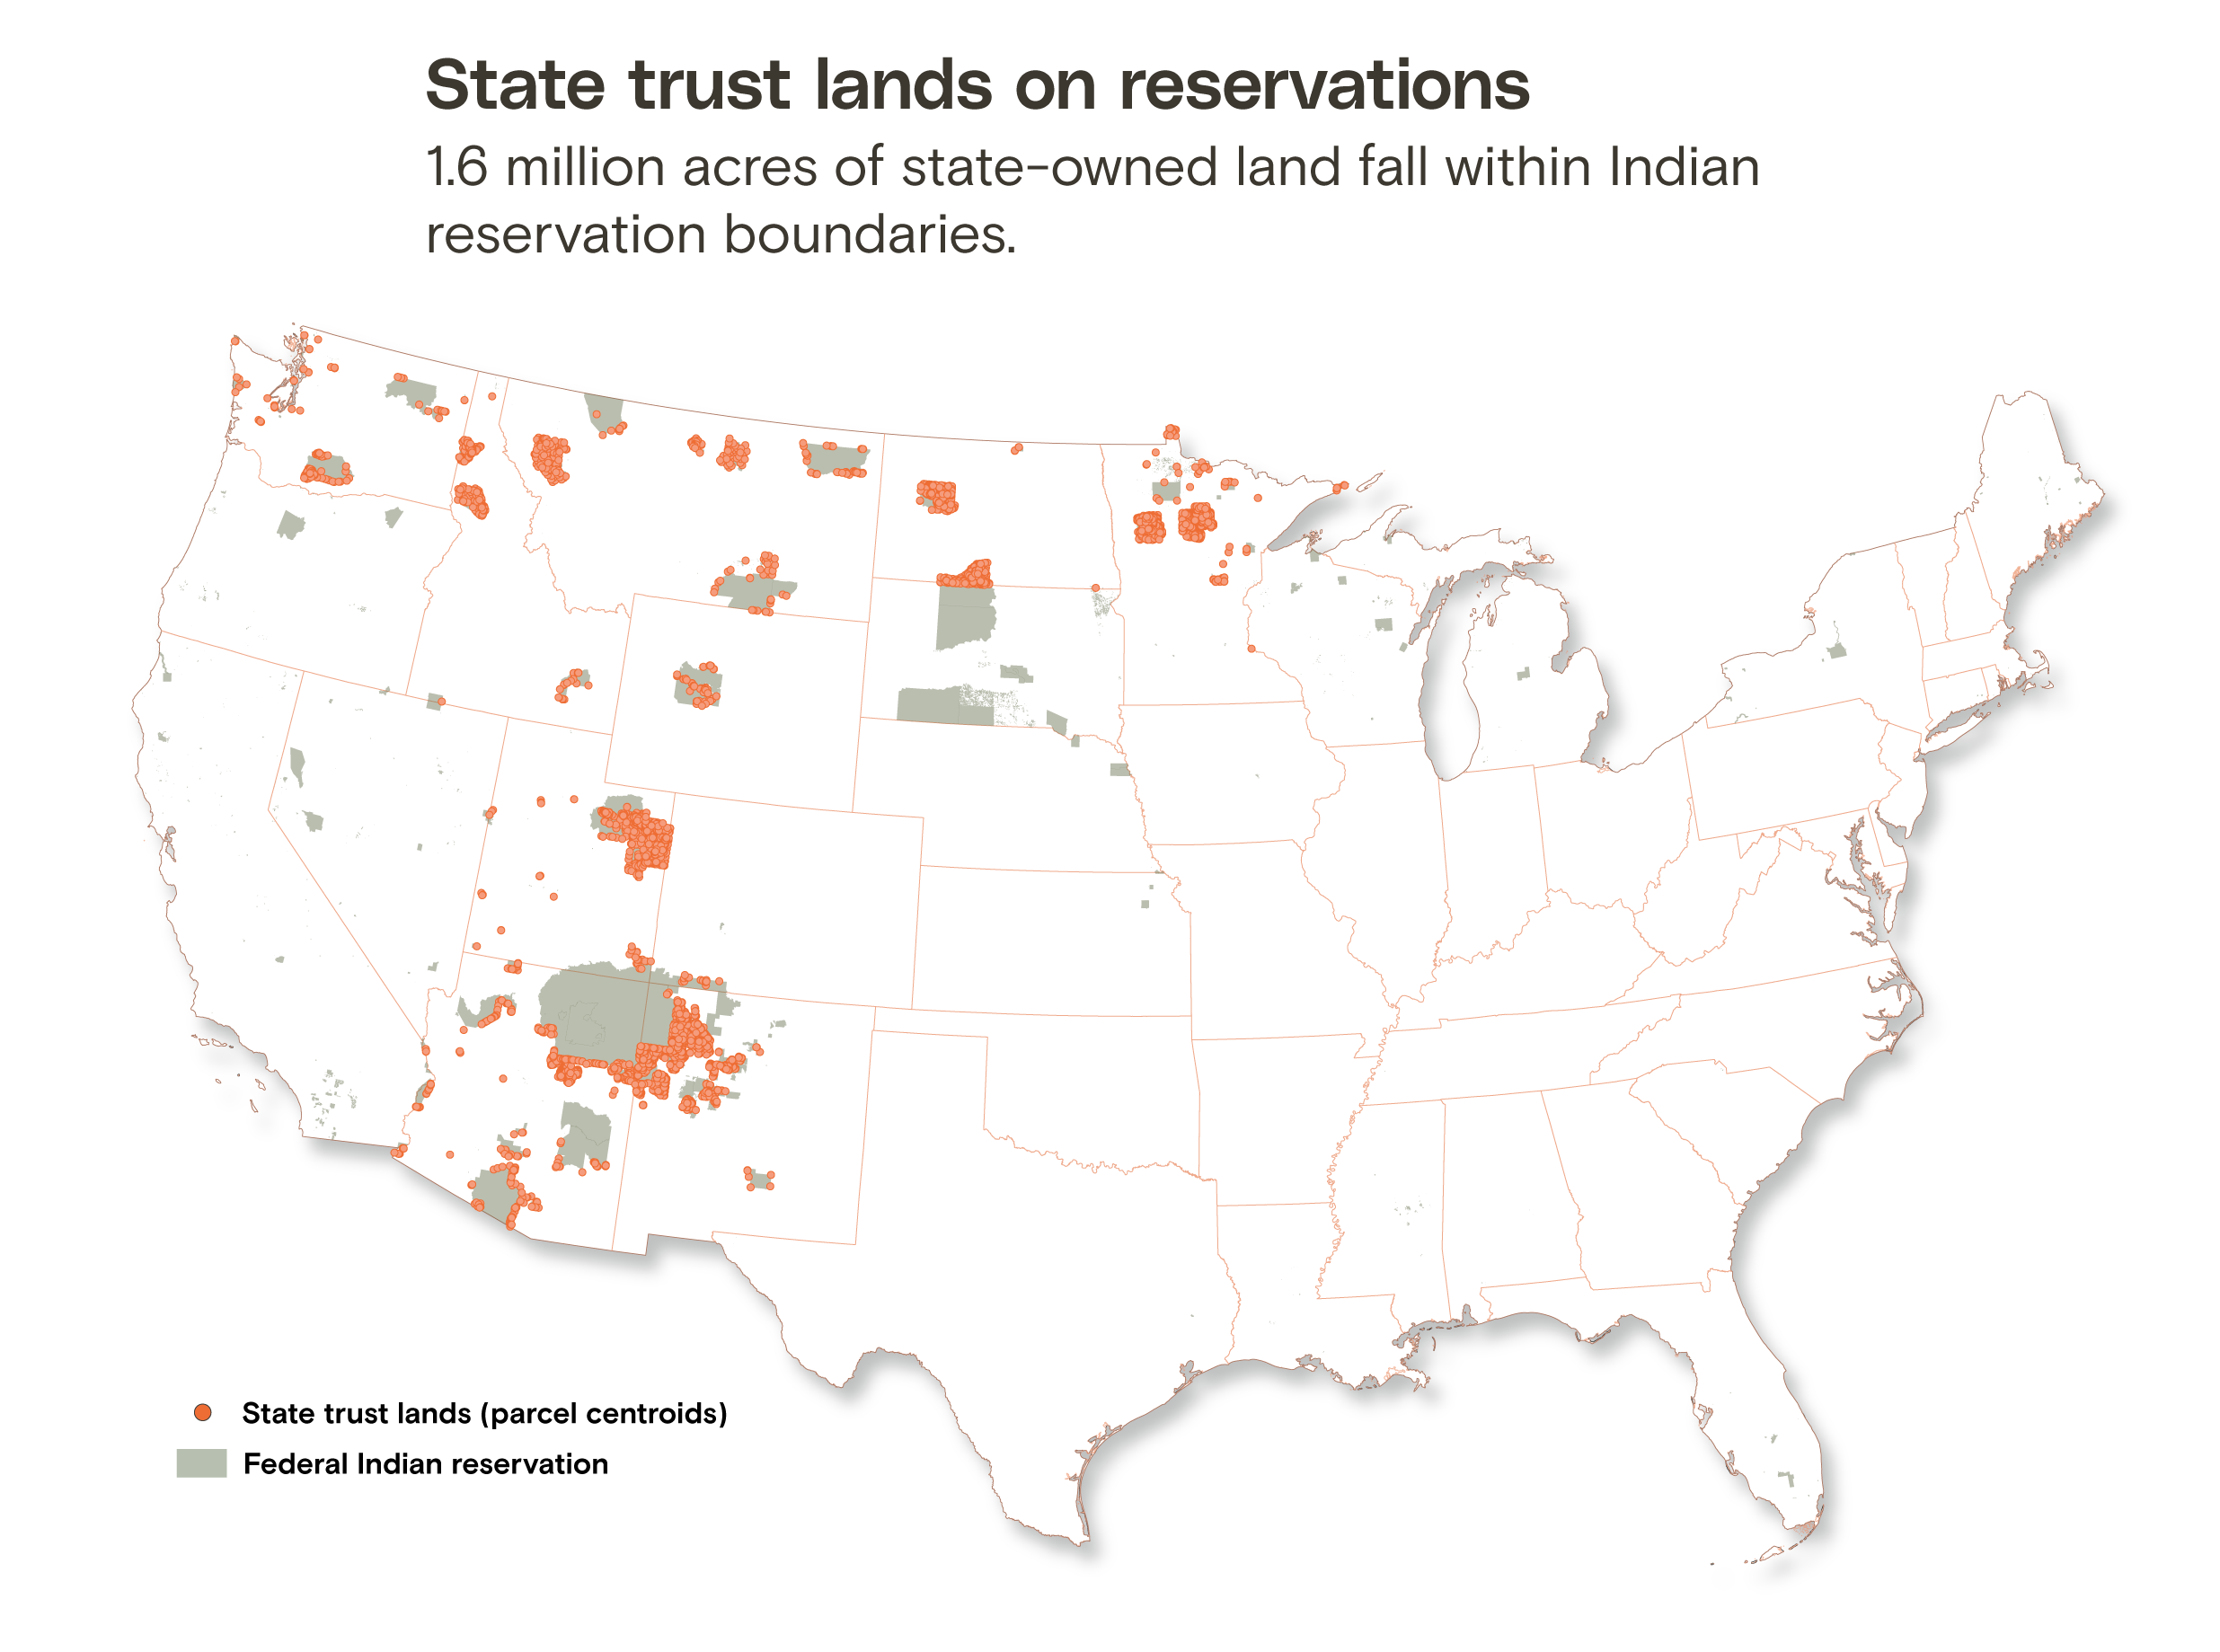 A map showing state trust lands (as parcel centroids) within Federal Indian reservation boundaries. 1.6 million acres of state-owned land fall within reservation boundaries.